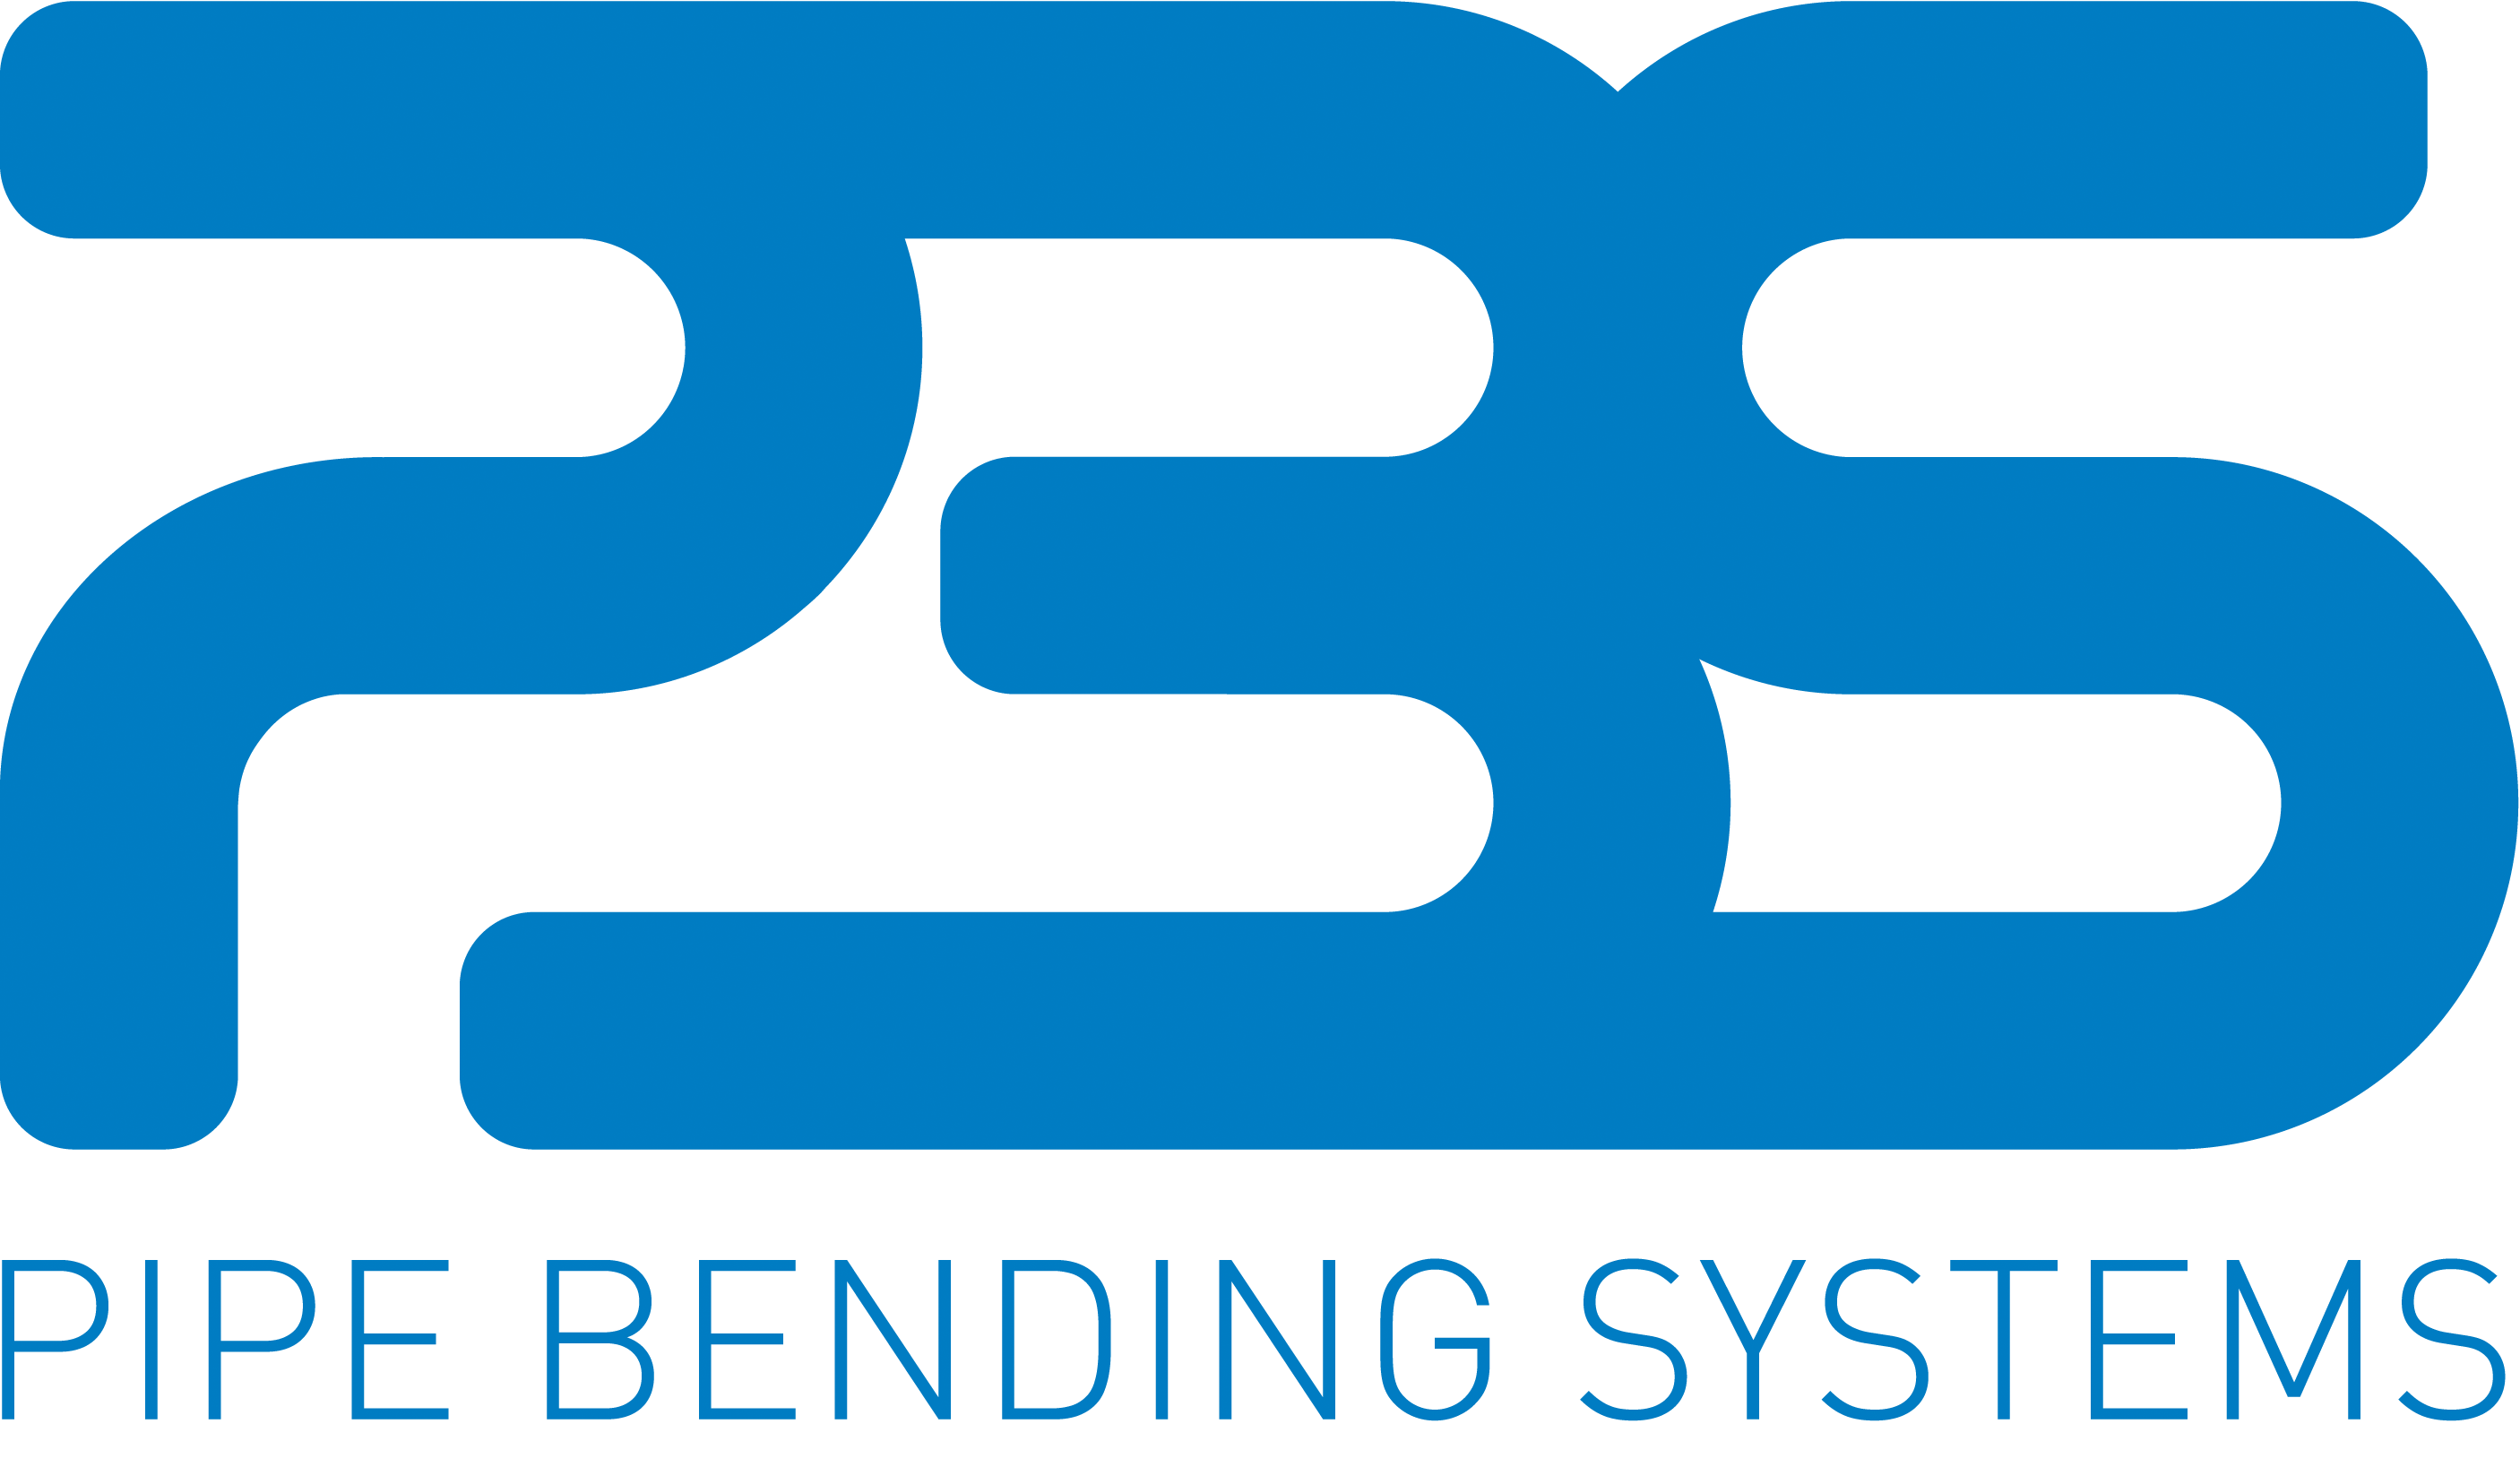 PIPE BENDING SYSTEMS GmbH & Co. KG